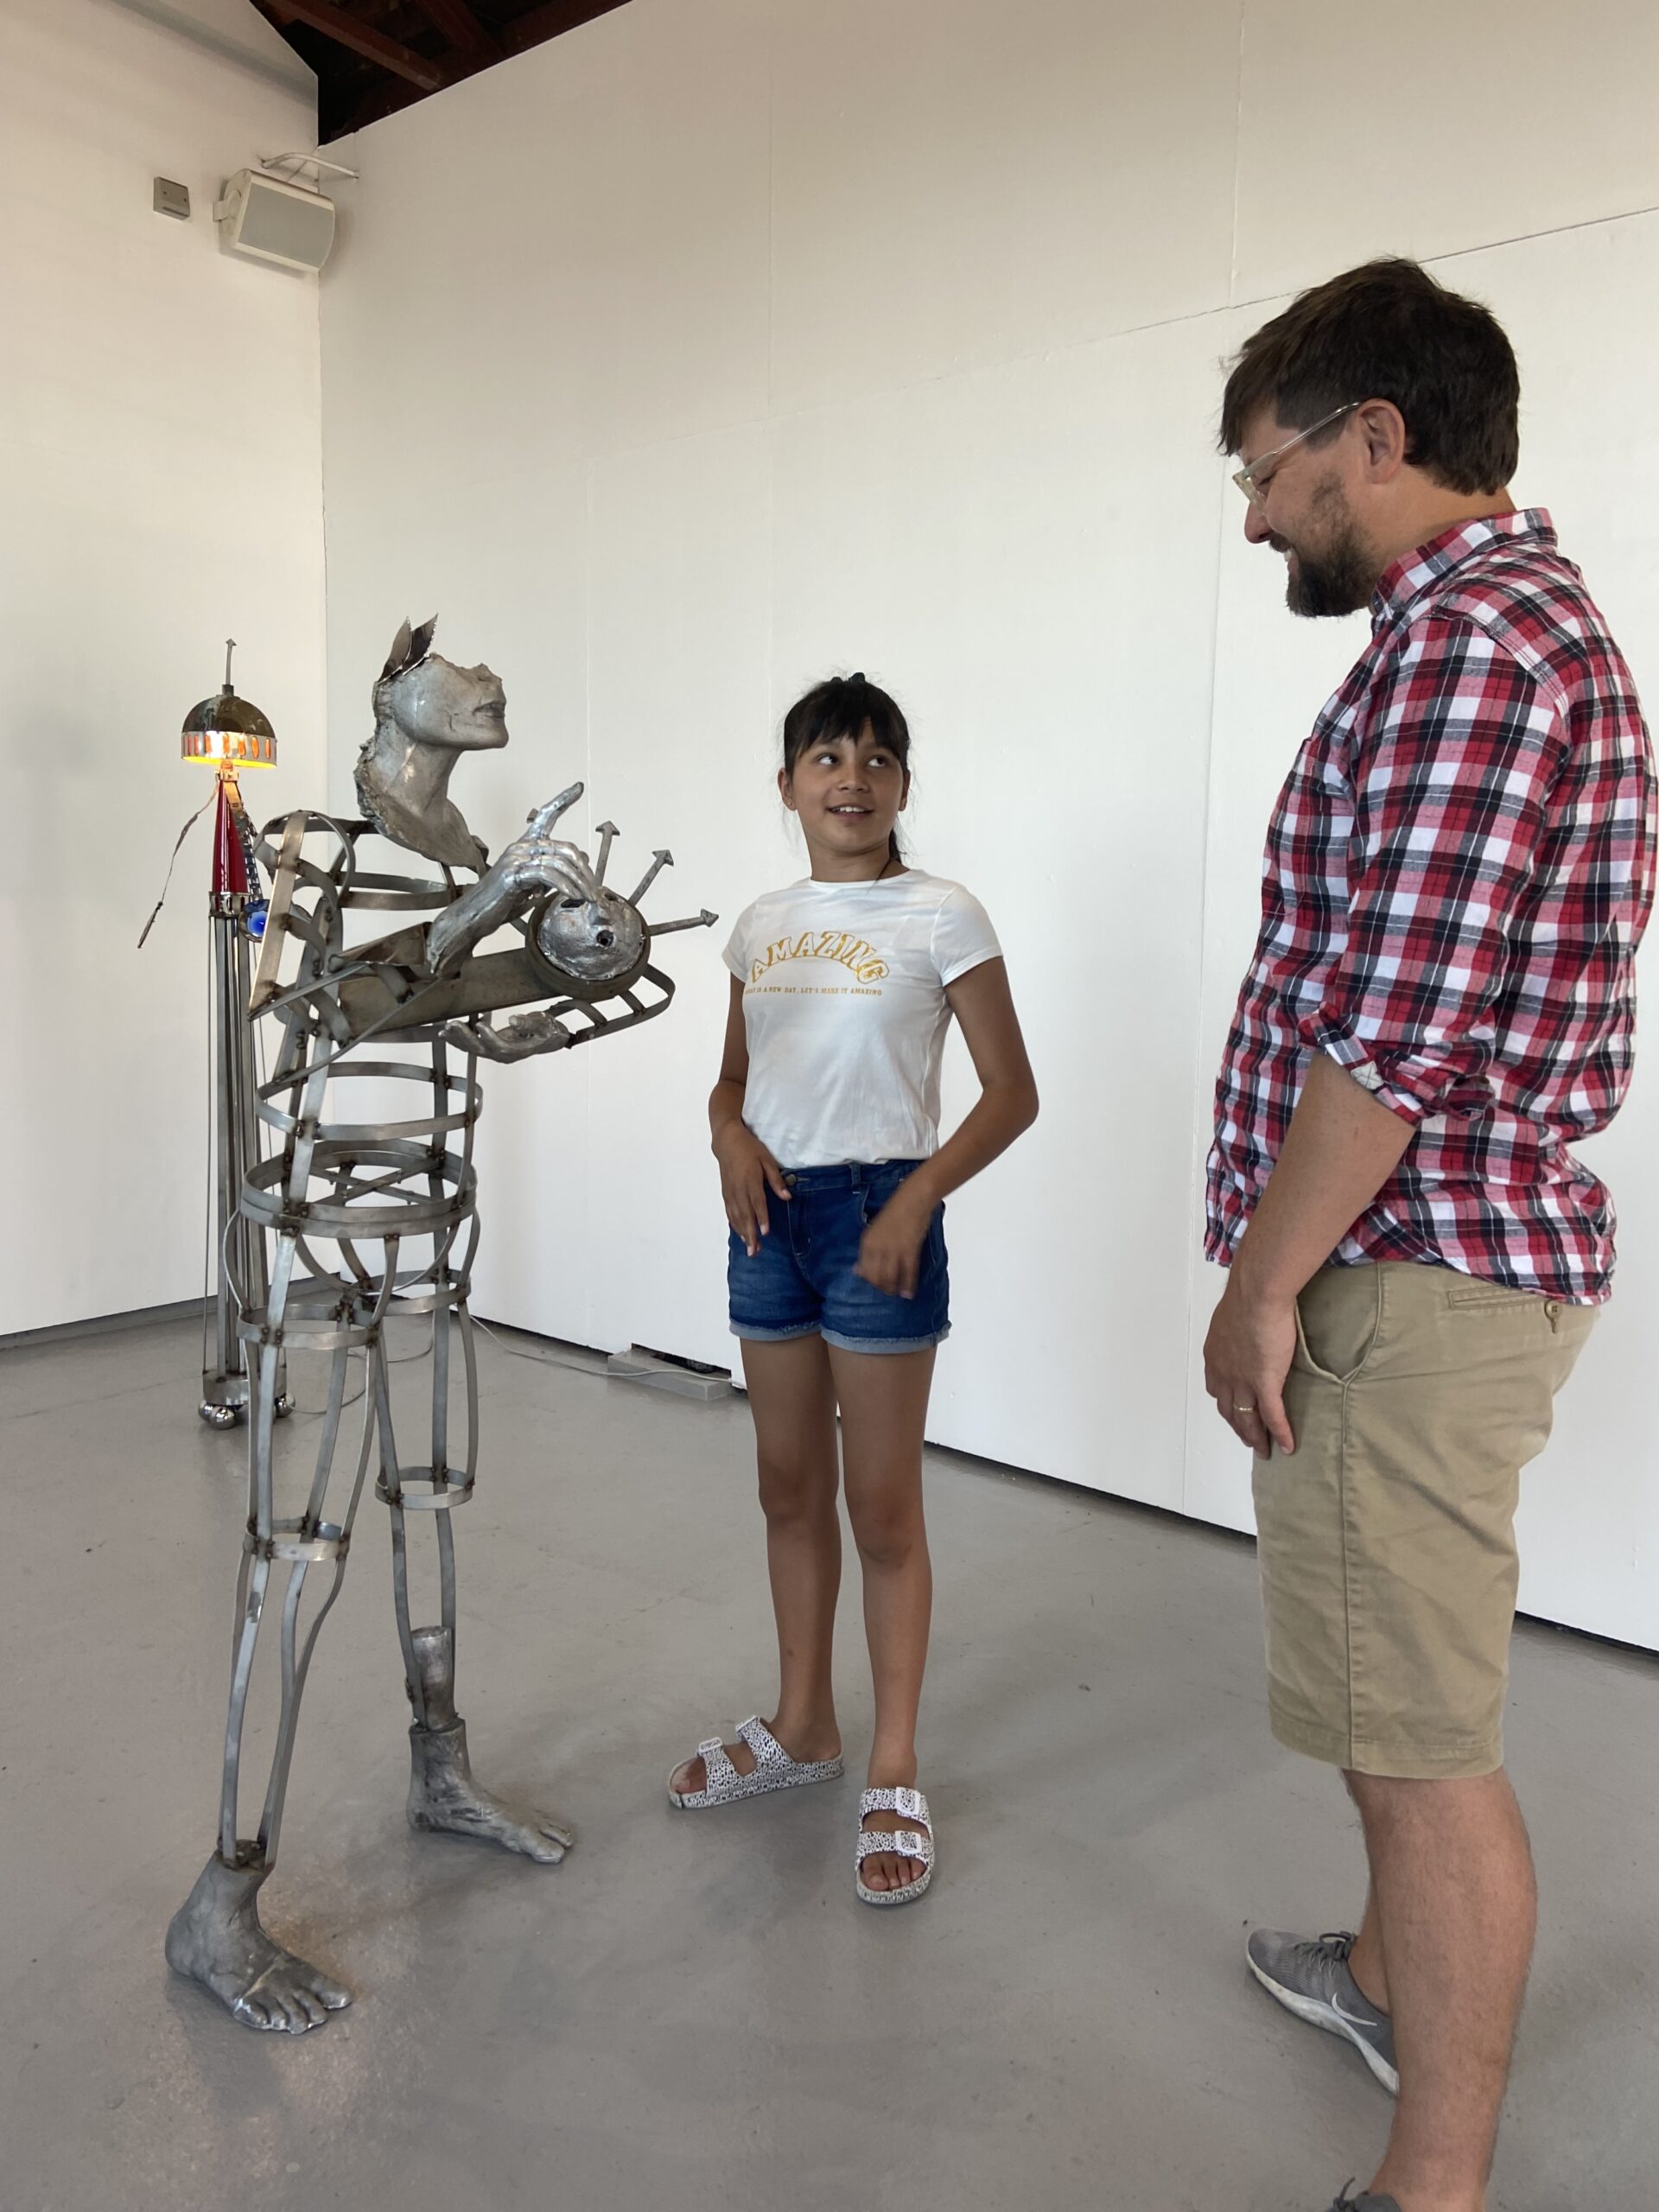 A metal sculpture of a person with half a face inside an art studio. Stood next to it is a a child in white shirt and denim shorts, smiling at an adult who is looking at the sculpture, wearing a checked shirt and brown shorts. 